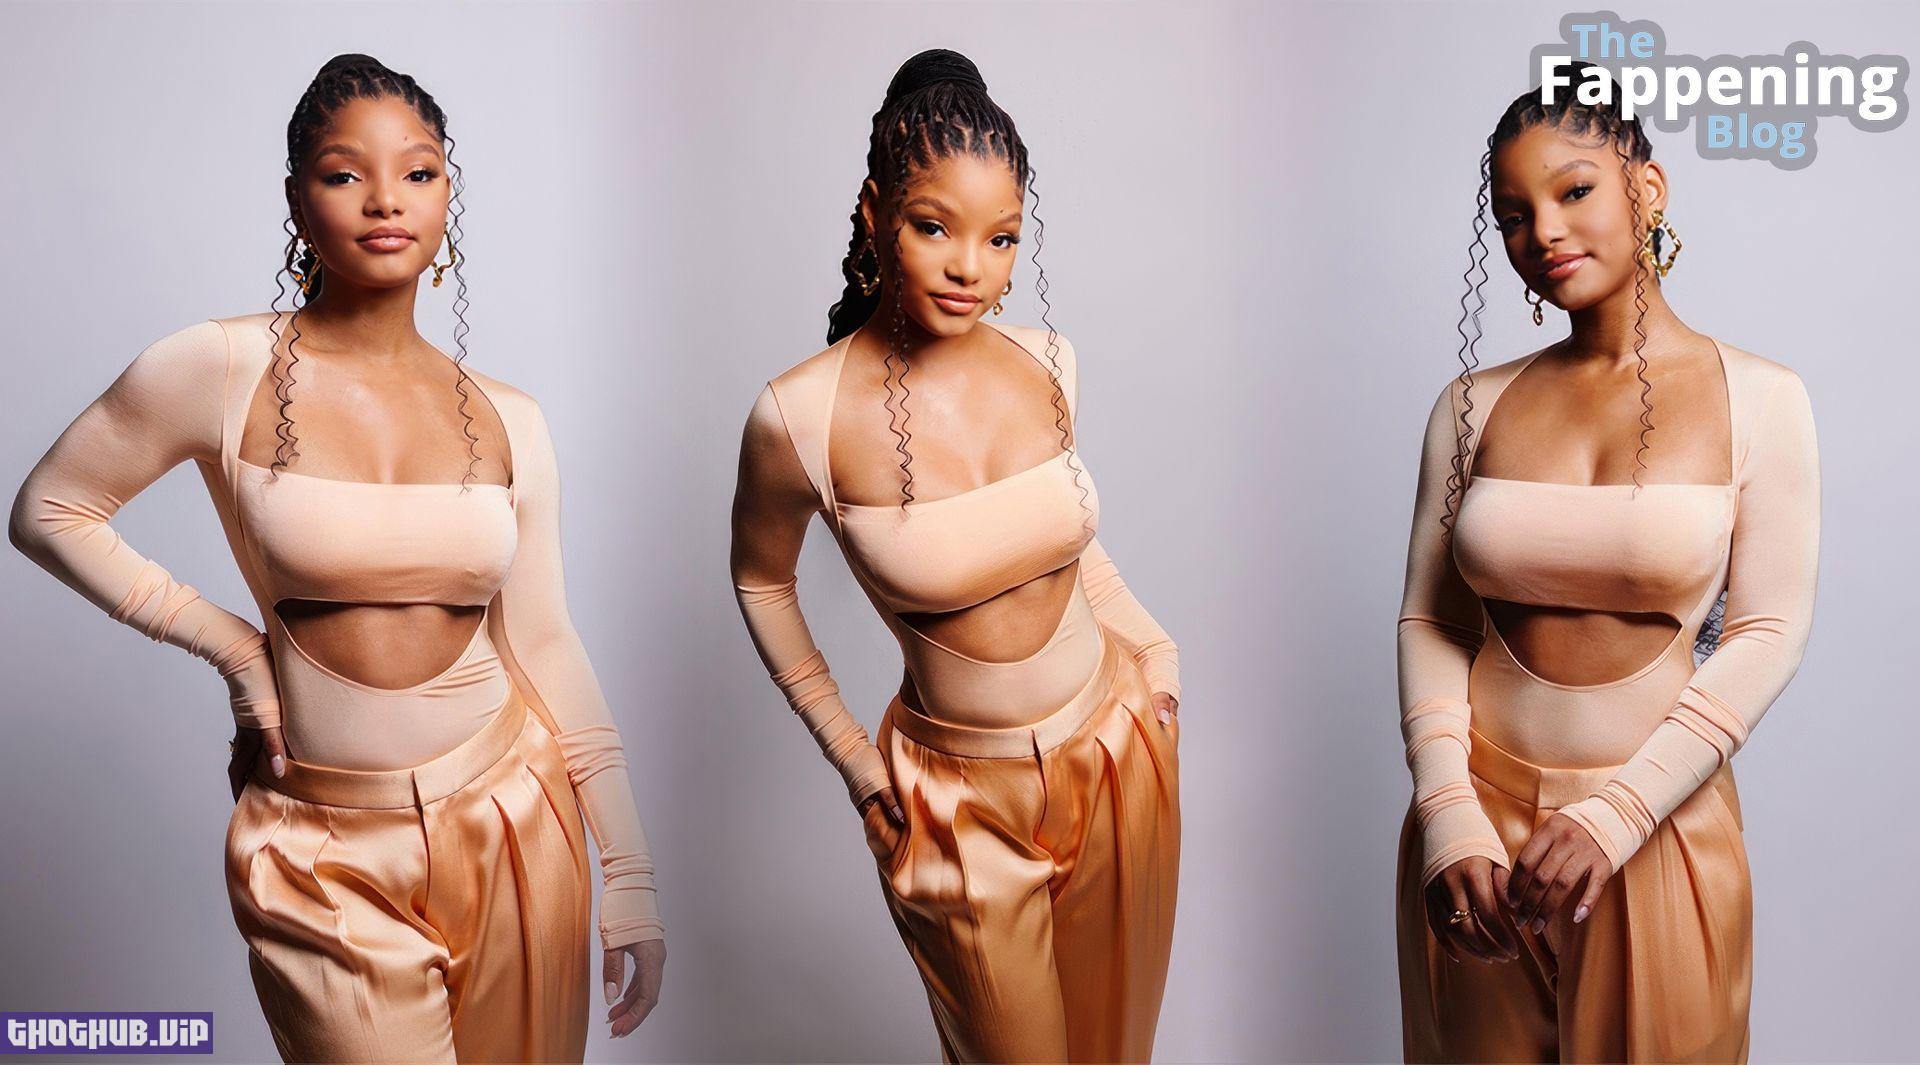 Halle Bailey Sexy The Fappening Blog 5 1